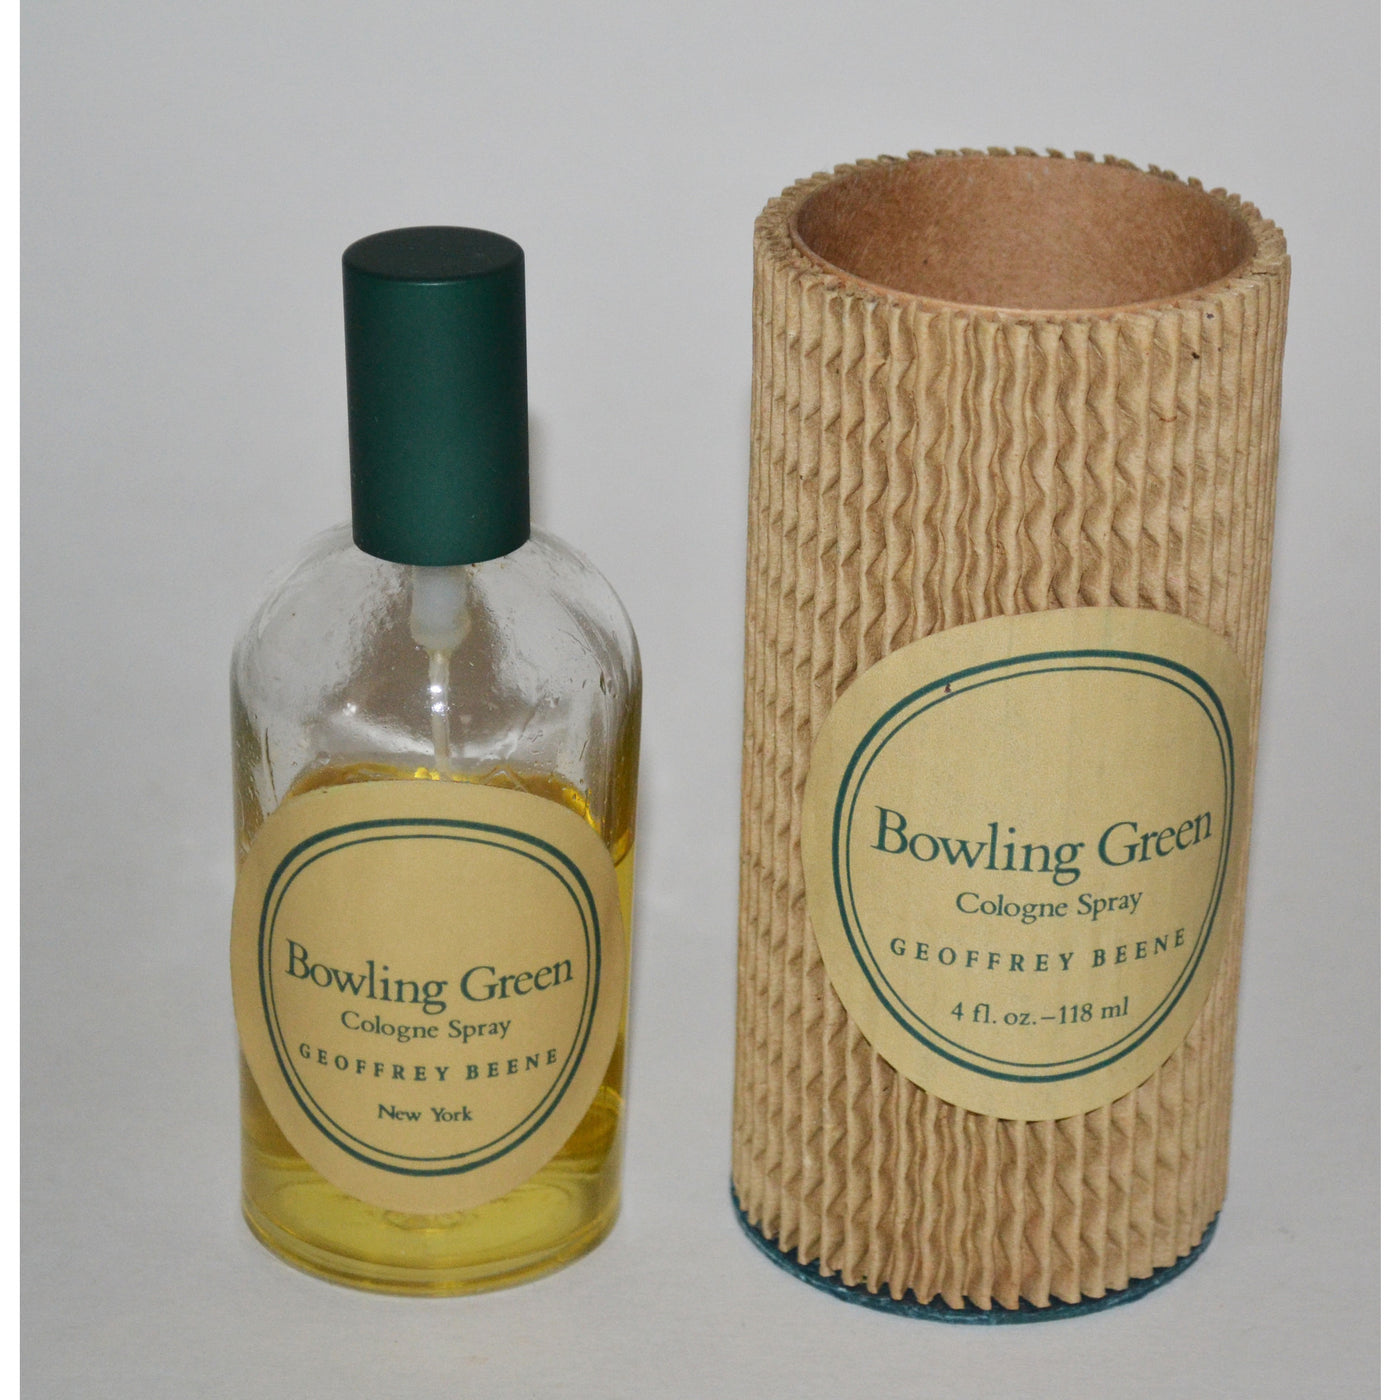 Vintage Bowling Green Cologne By Geoffrey Beene